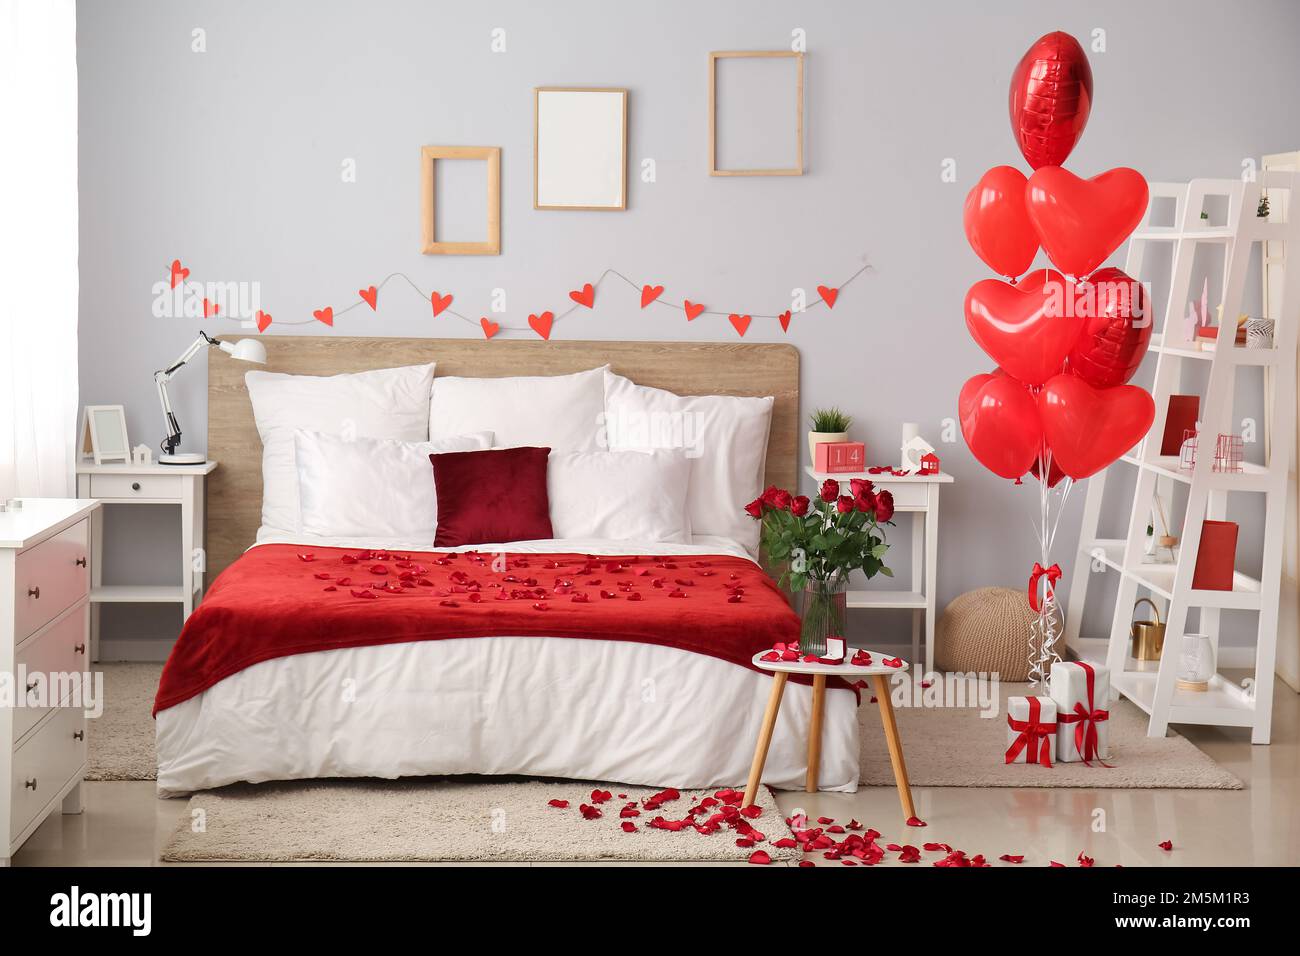 https://c8.alamy.com/comp/2M5M1R3/interior-of-bedroom-decorated-for-valentines-day-with-roses-hearts-and-balloons-2M5M1R3.jpg